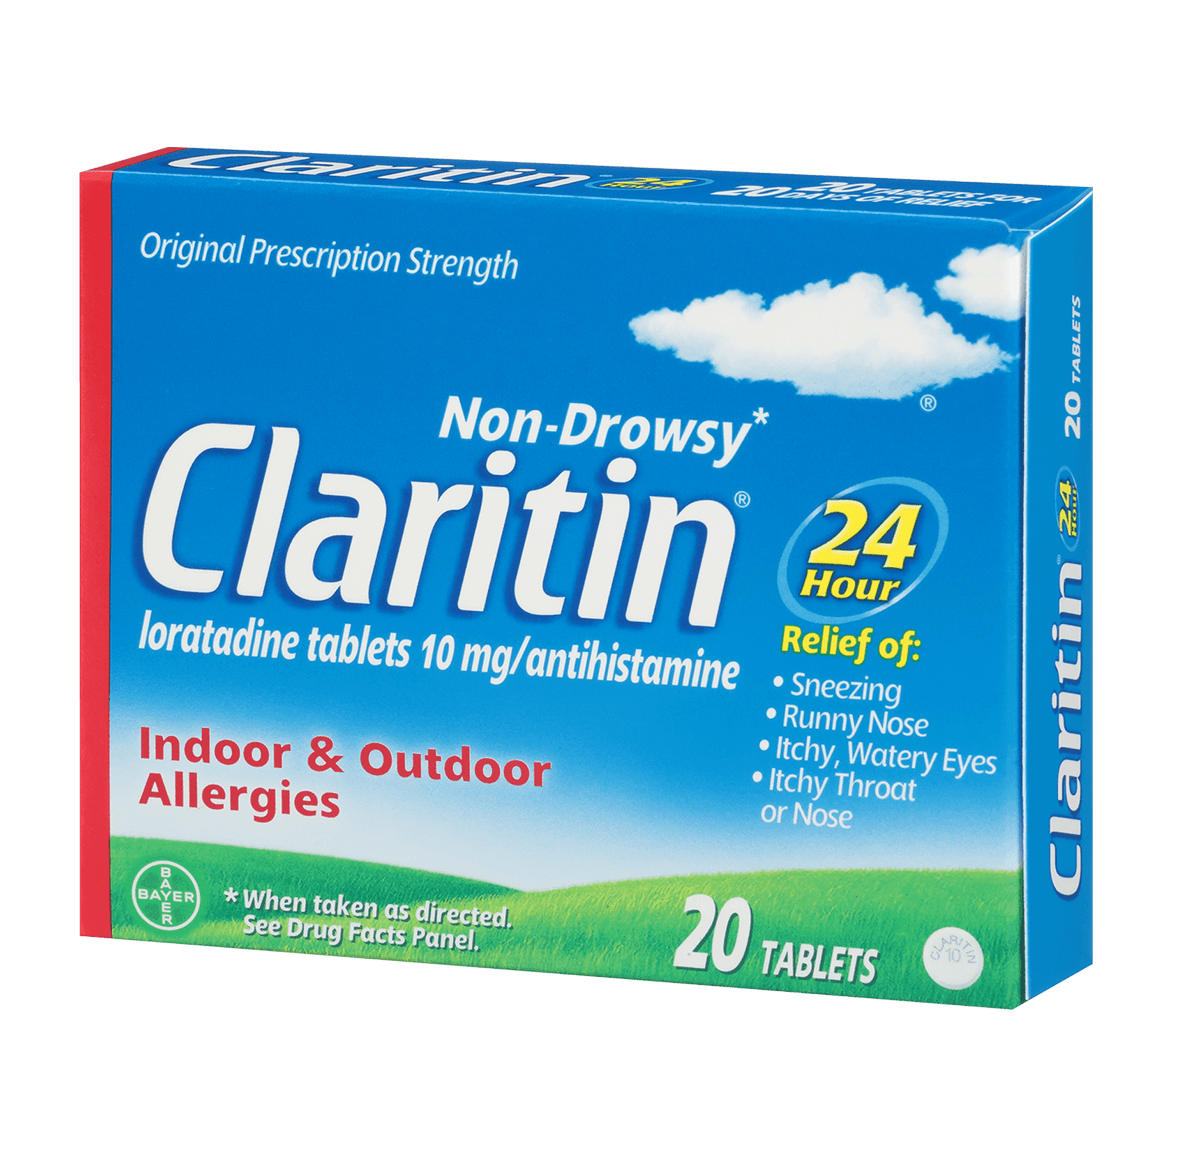 angled view of package of Claritin 24 hour tablets